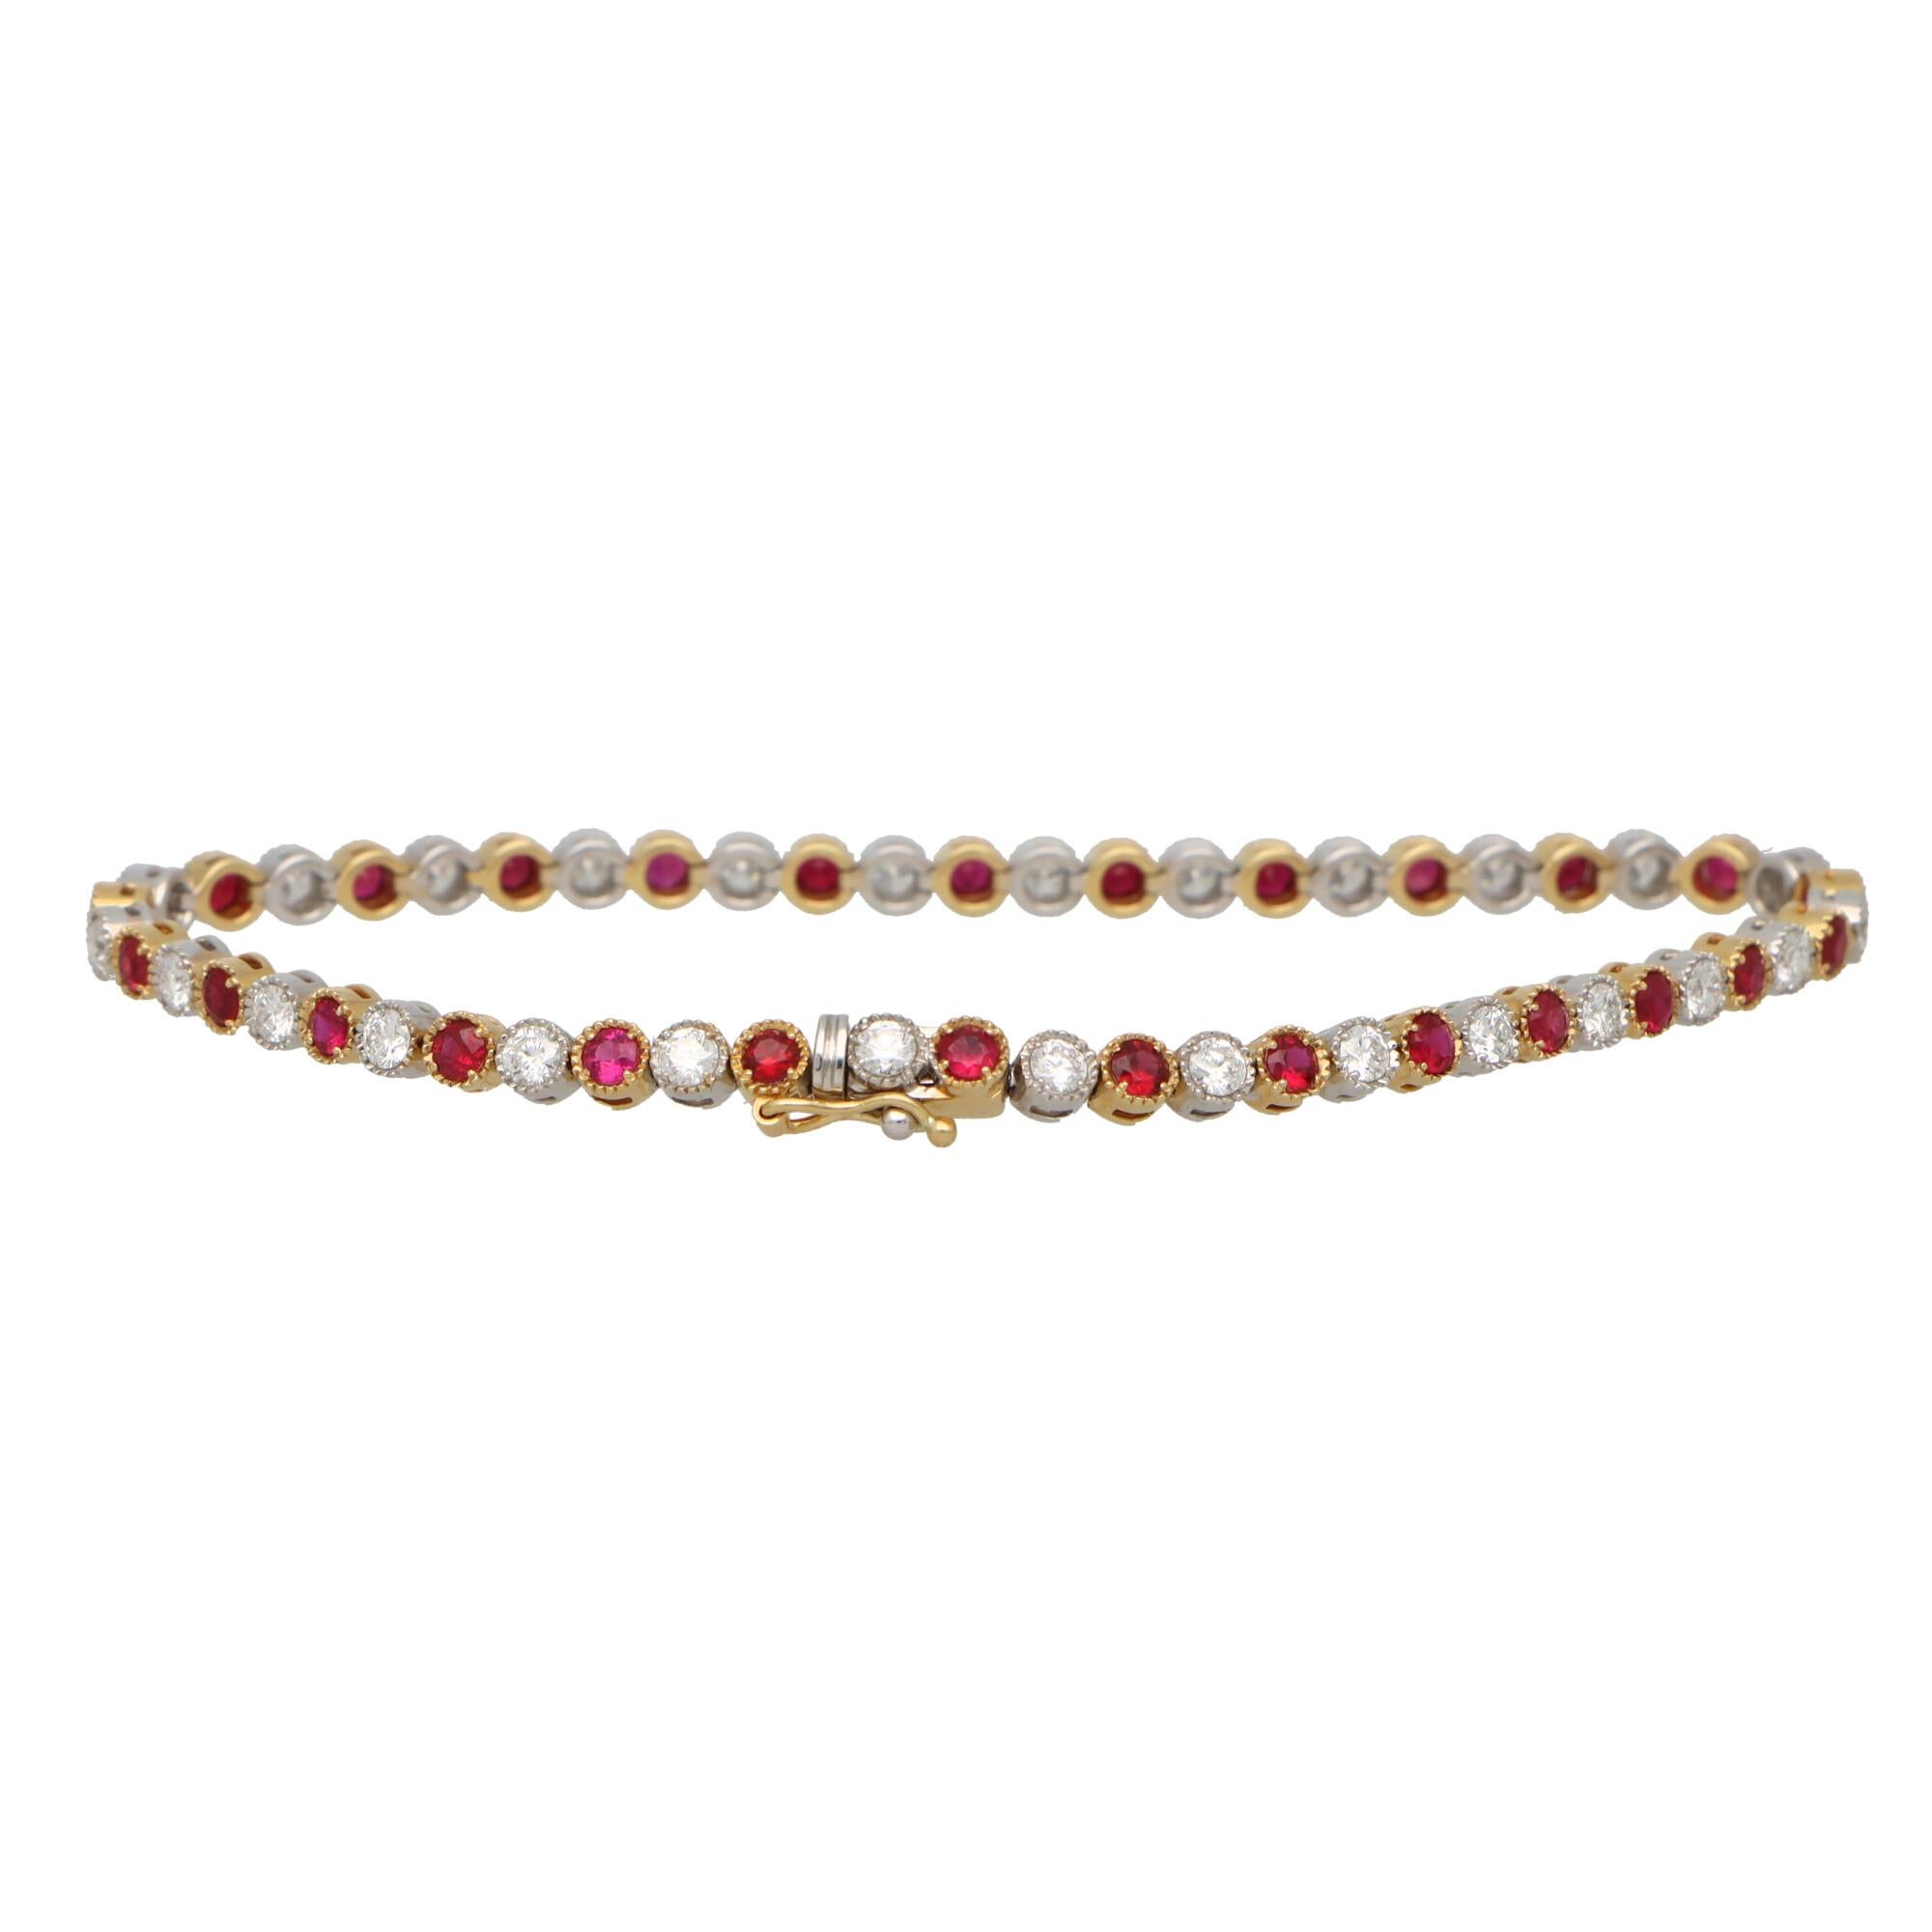 Women's or Men's Ruby and Diamond Tennis Line Bracelet Set in 18k Yellow and White Gold